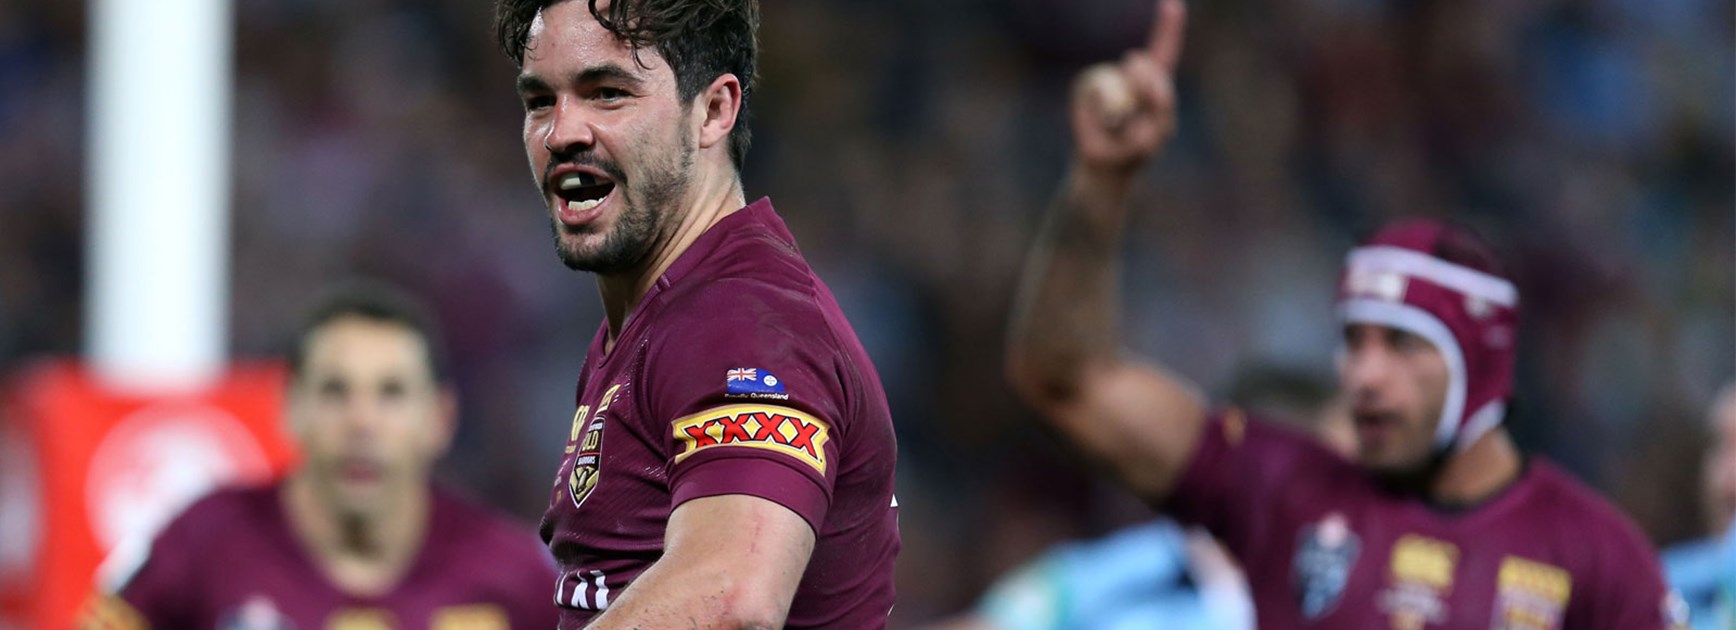 Roosters forward Aidan Guerra doesn't need reminding how good his Maroons teammate Johnathan Thurston is.